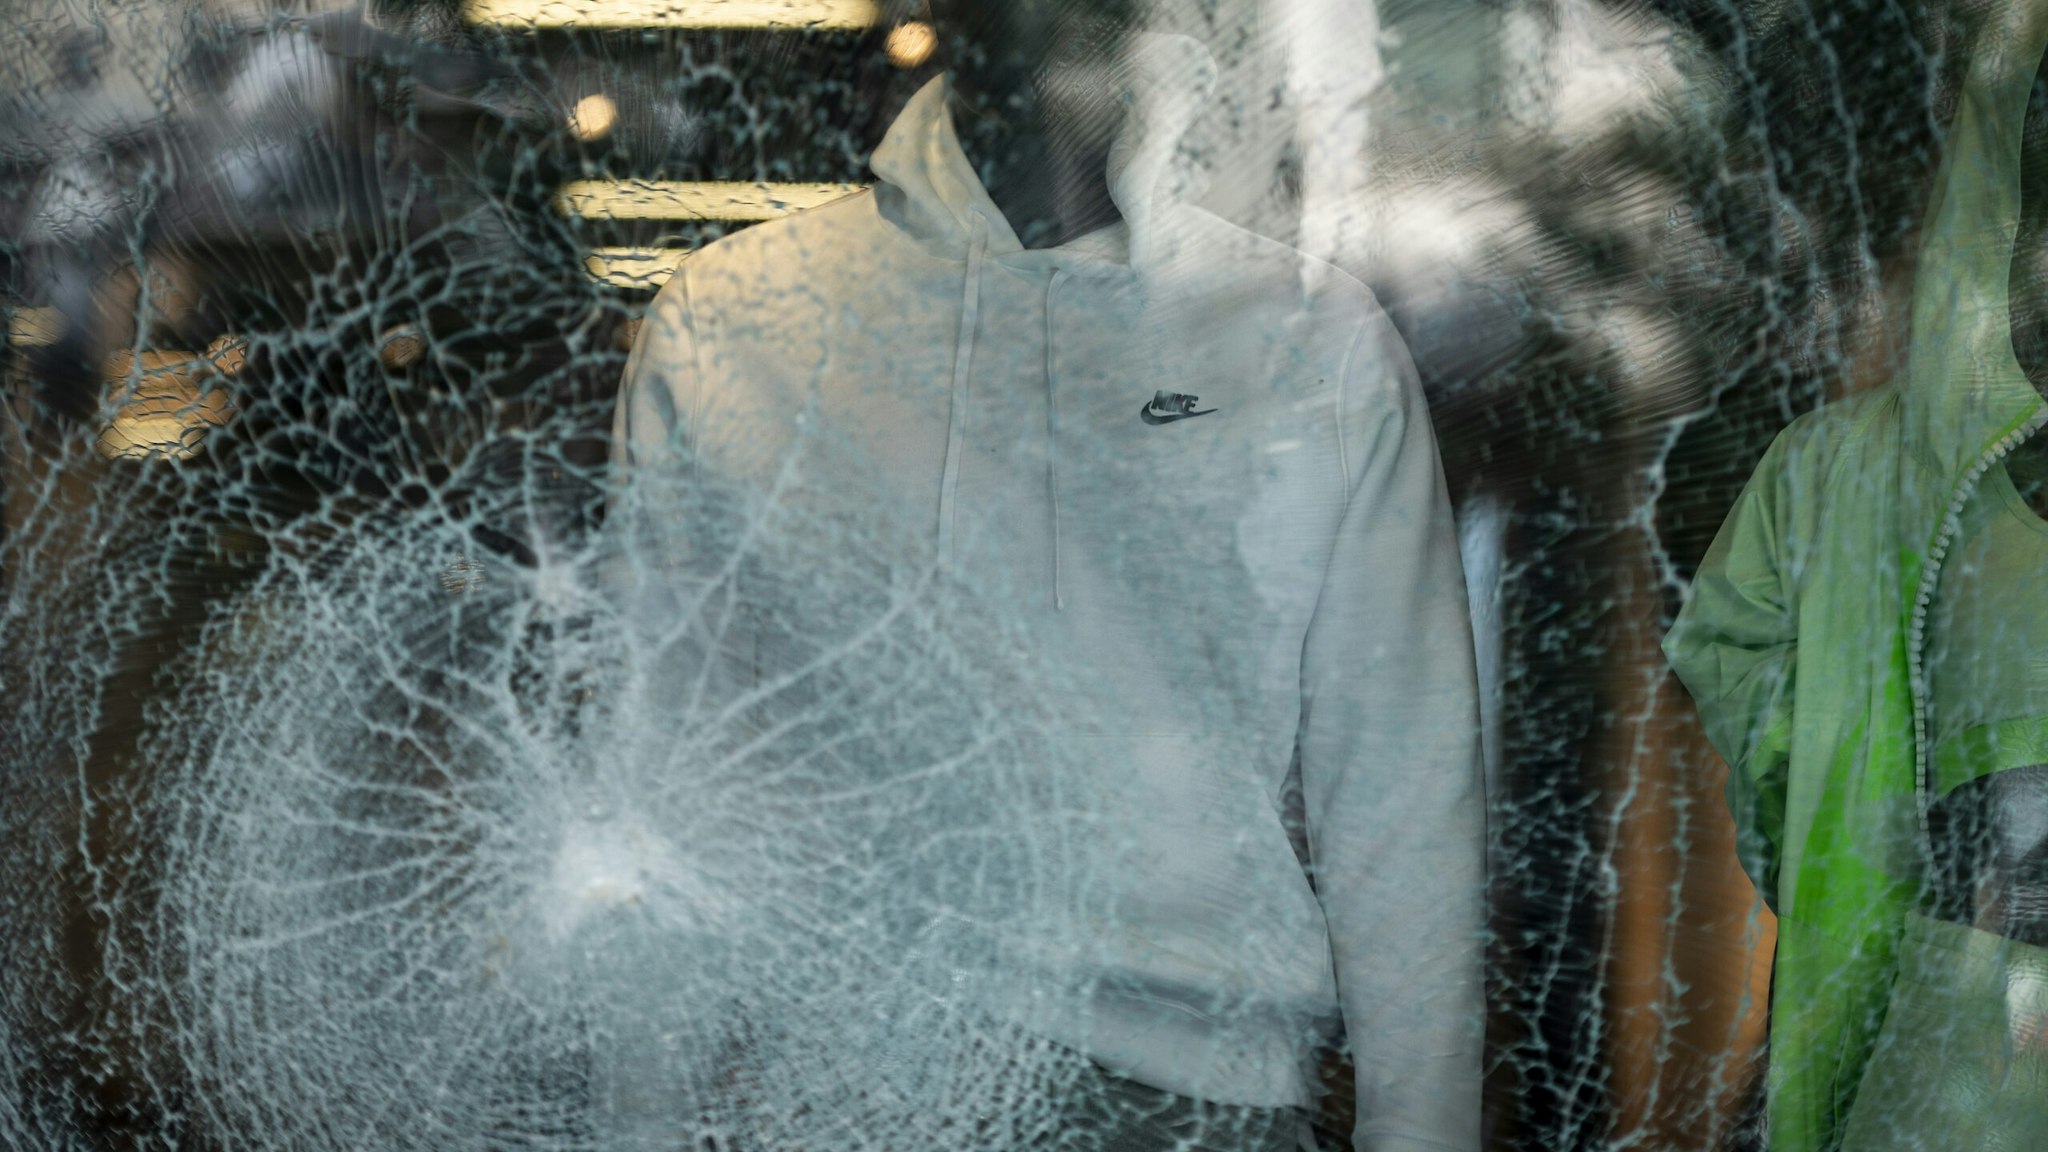 The glass window display of a Nike Inc. store stands shattered following looting on Michigan Avenue in Chicago, Illinois, U.S., on Monday, Aug. 10, 2020. Chicago police arrested more than 100 people for looting, disorderly conduct and battery against officers, among other charges, as crowds of people descended upon the city's downtown overnight, Superintendent David Brown said during a press conference Monday. Photographer: Christopher Dilts/Bloomberg via Getty Images